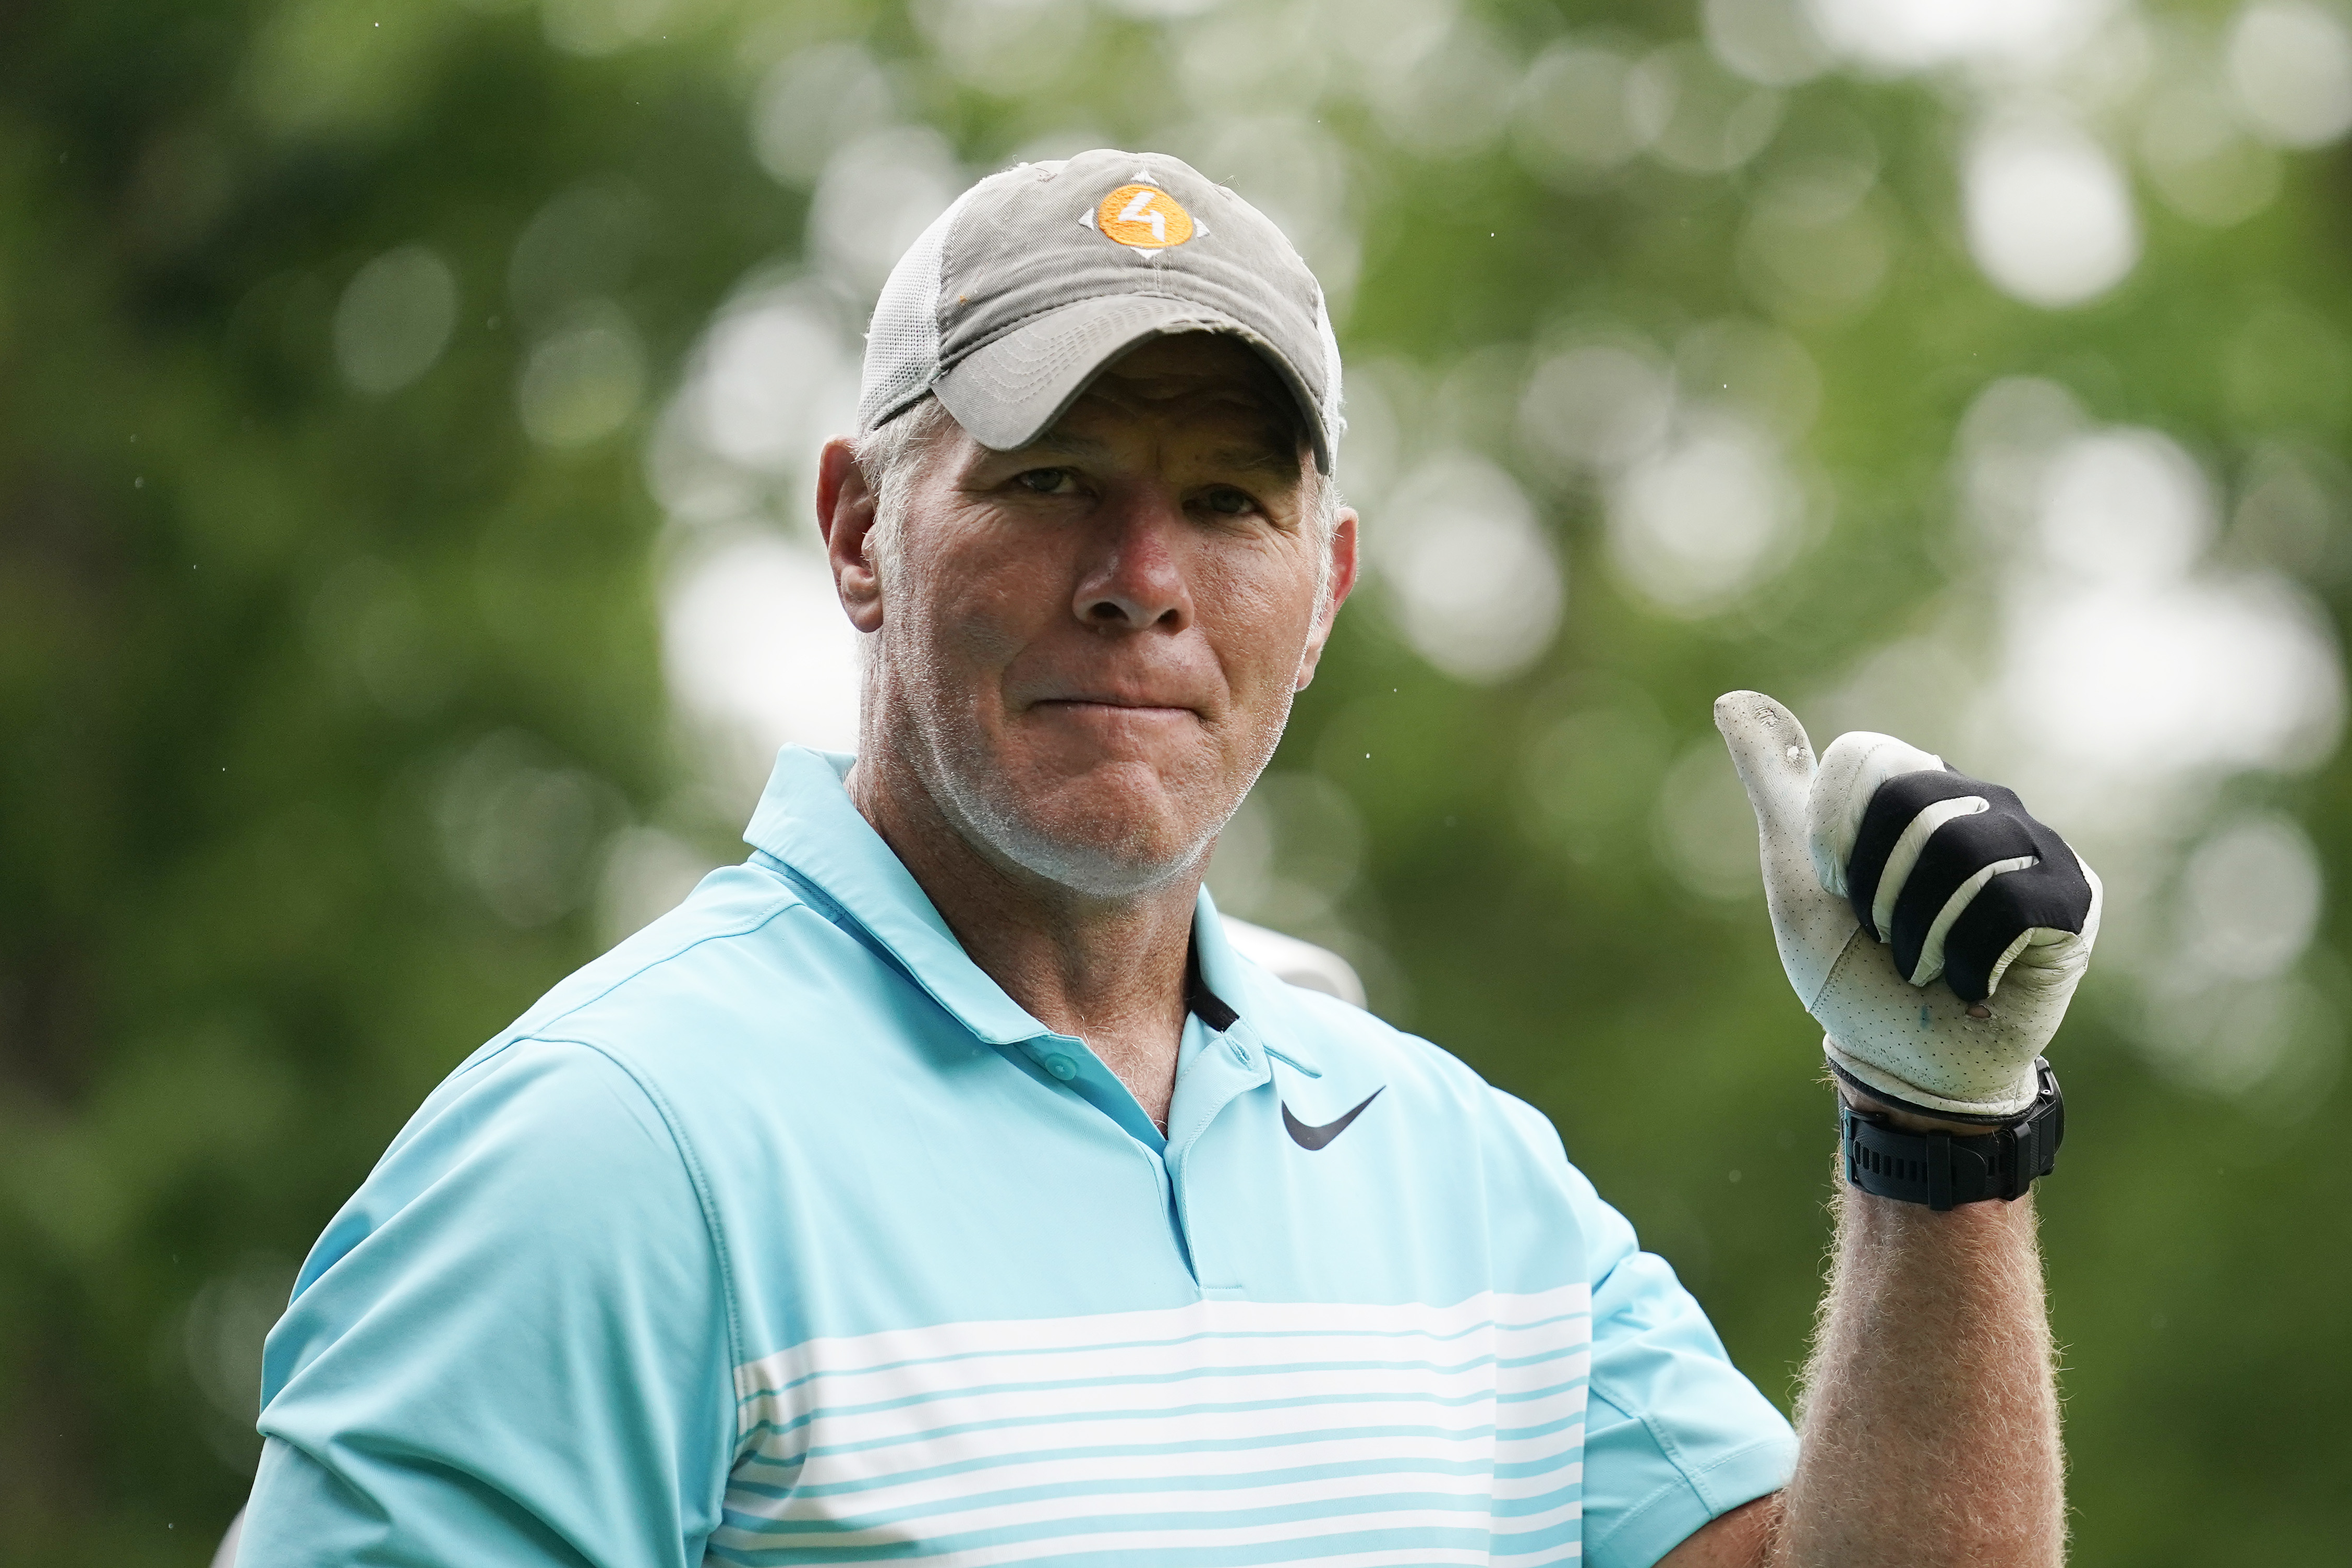 Brett Favre Loses Another Business Venture Amid Welfare-Fraud Scandal